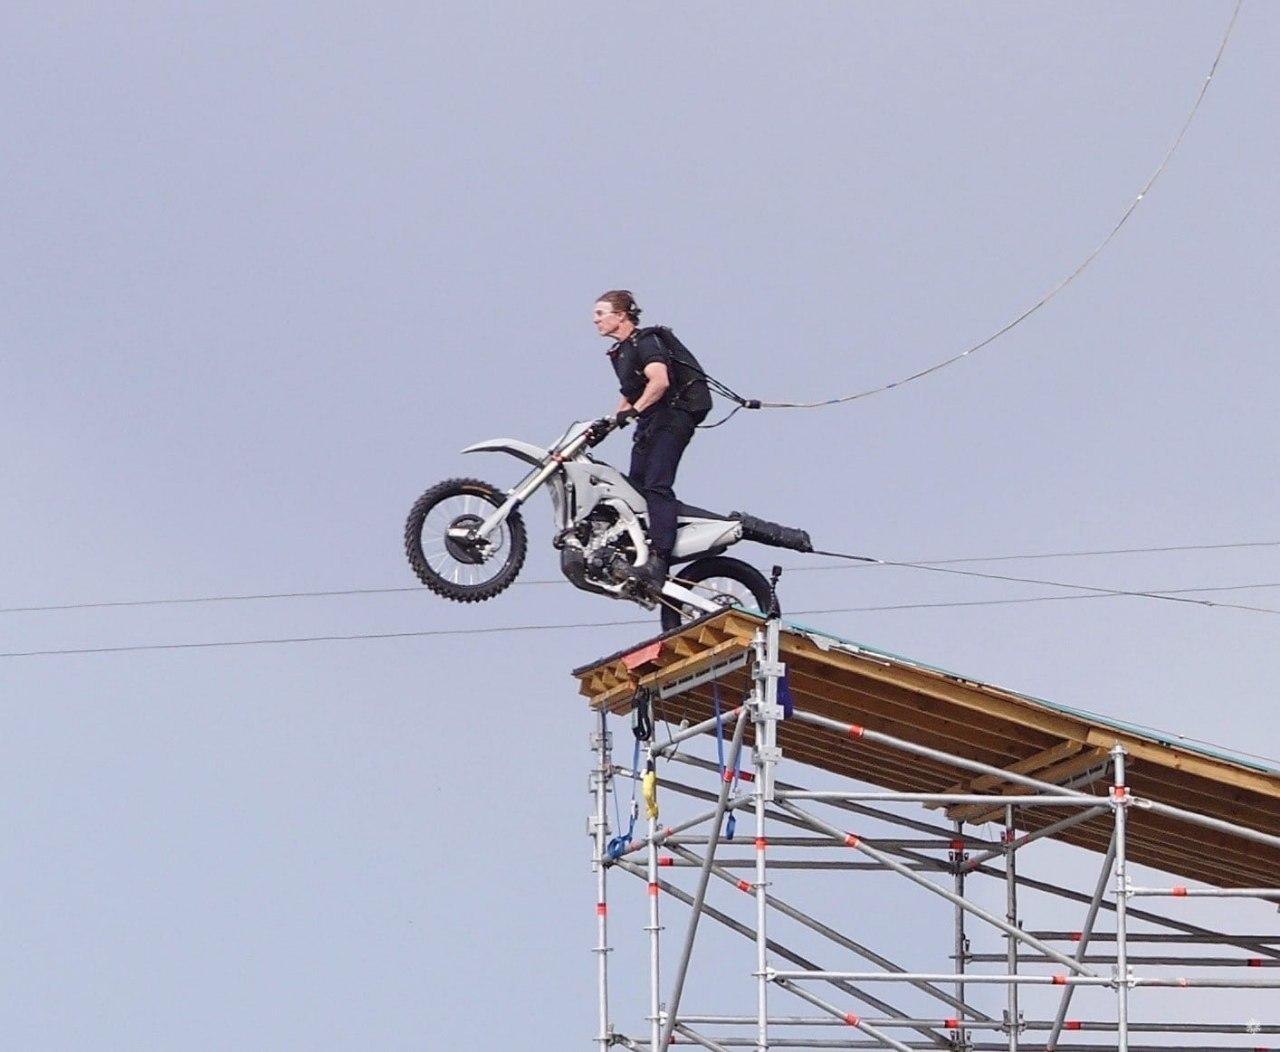 Tom Cruise performs incredible motorcycle stunt at 500 feet for Mission: Impossible - Tom Cruise, Ethan Hunt, mission Impossible, Motorcycles, Deadly Stunt, Actors and actresses, Longpost, Celebrities, Moto